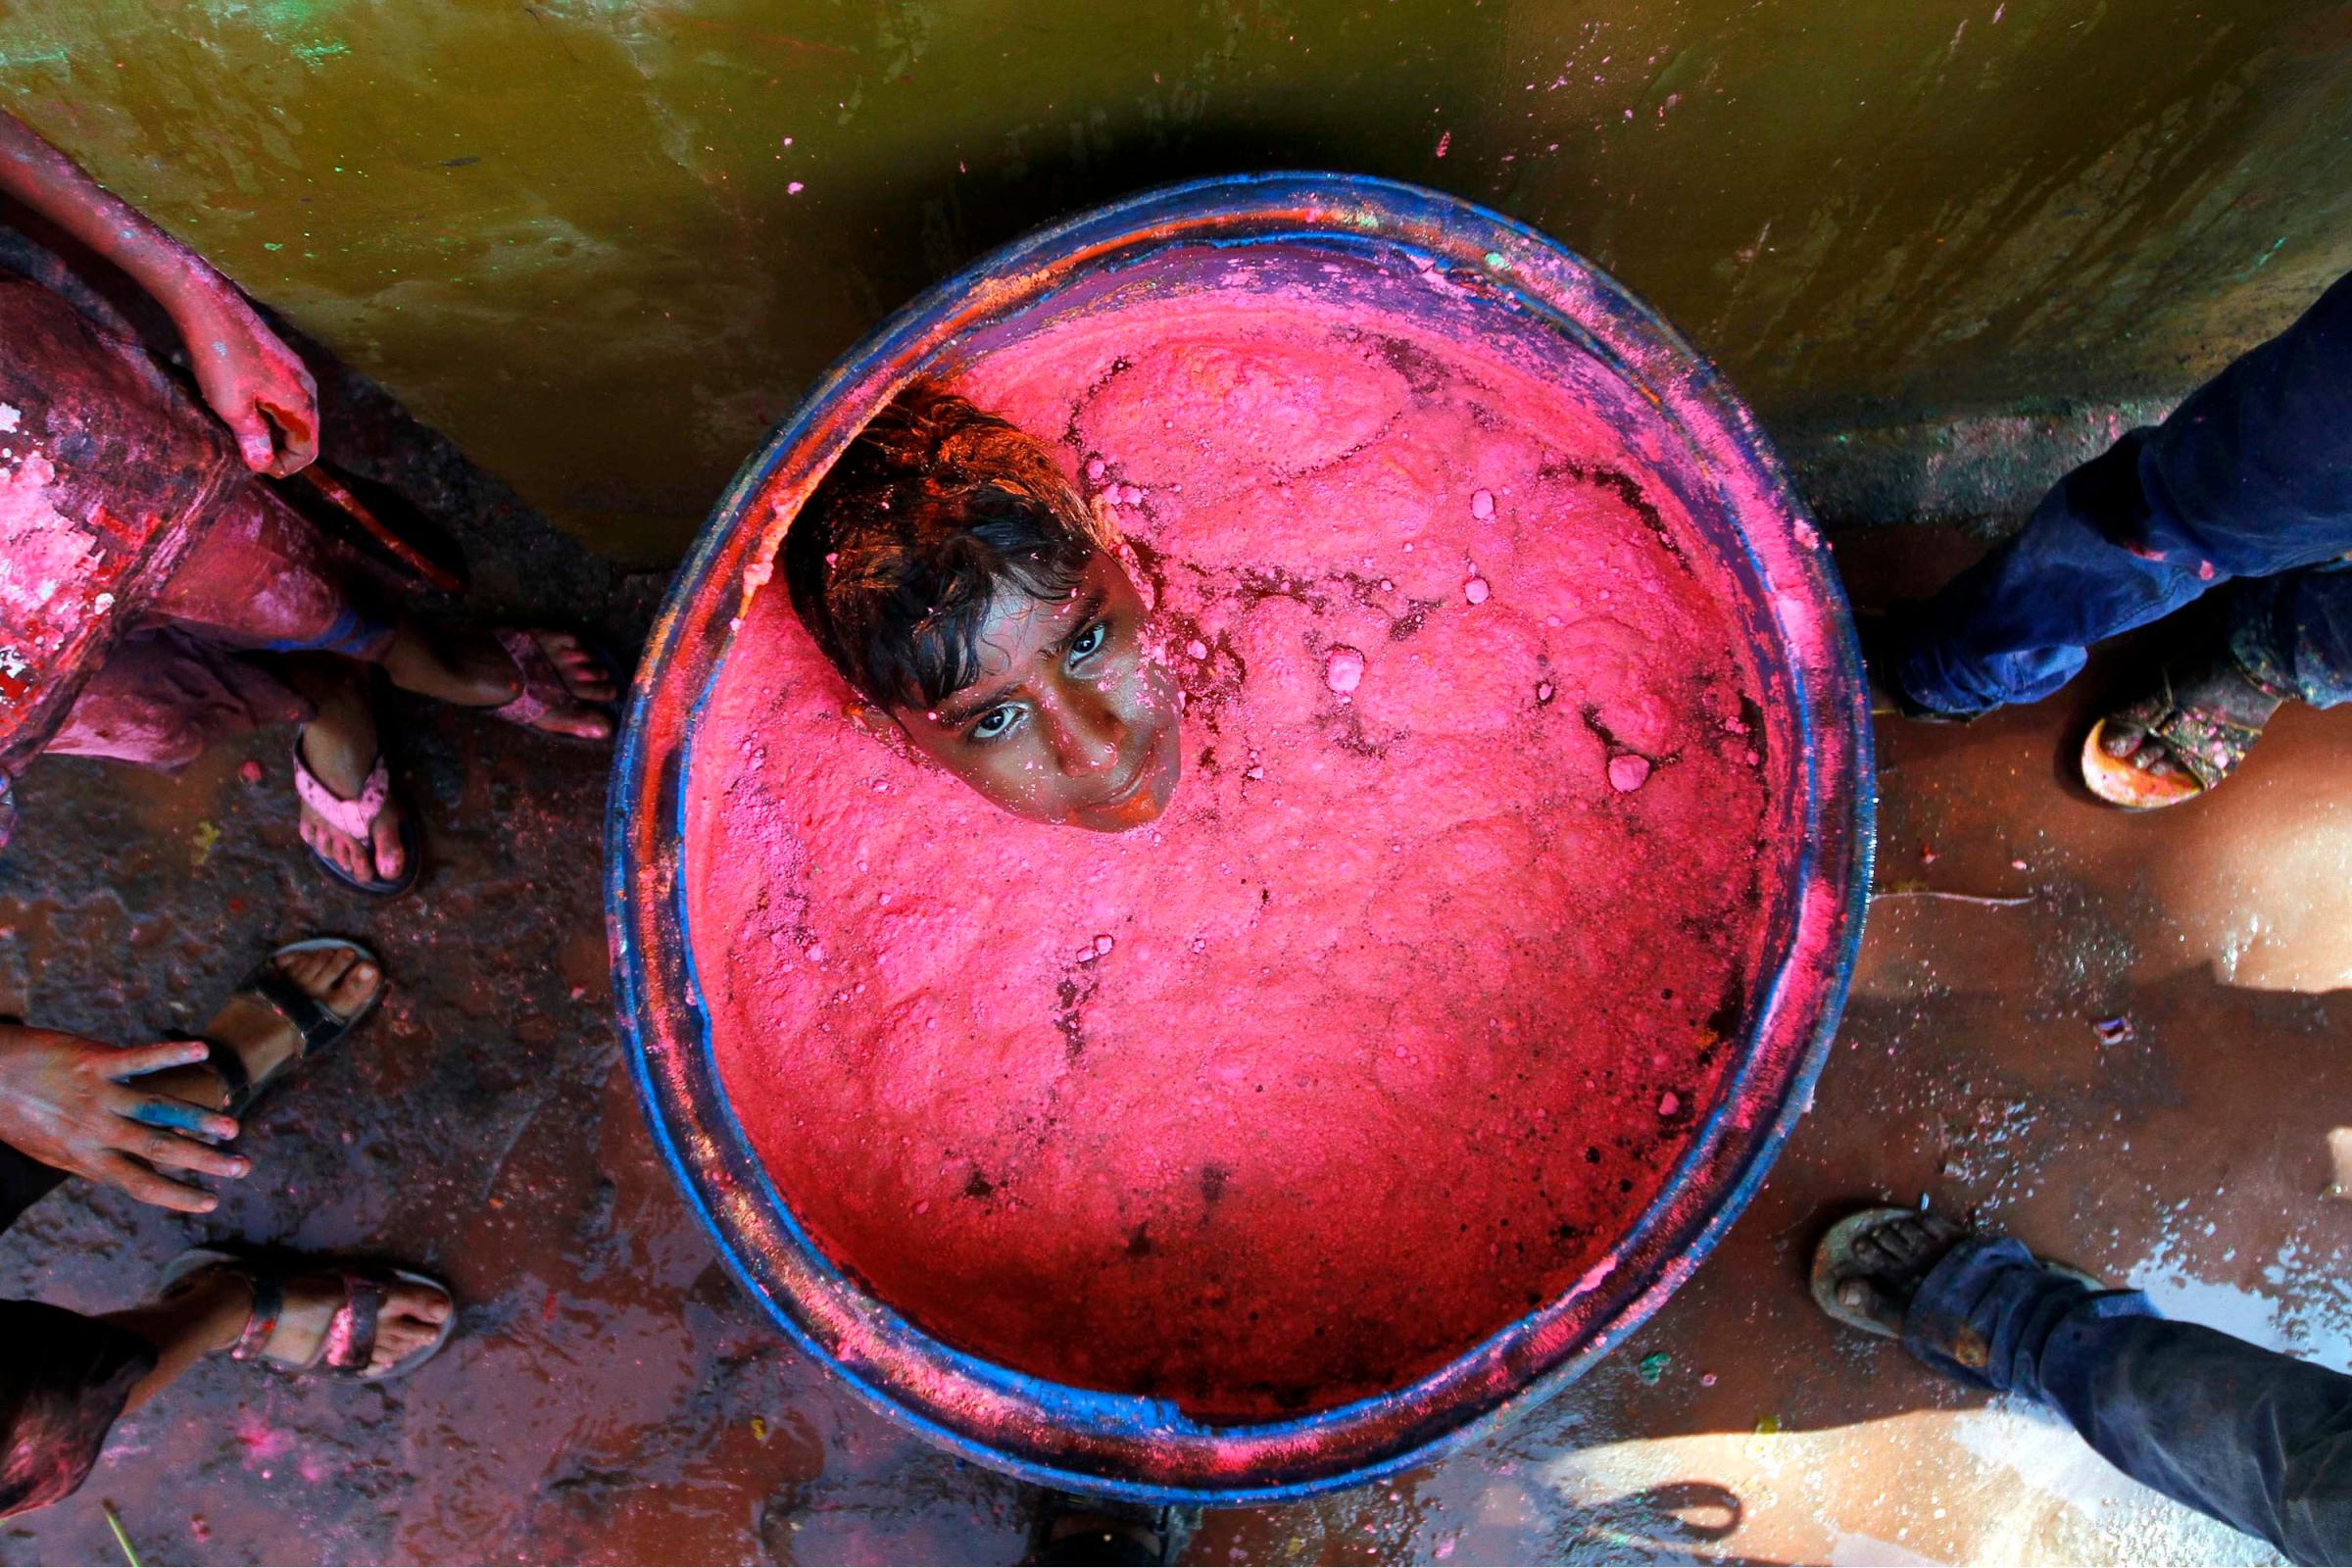 A boy sits in a plastic container filled with coloured water during Holi celebrations in the southern Indian city of Chennai March 16, 2014. Holi, also known as the Festival of Colours, heralds the beginning of spring and is celebrated all over India.